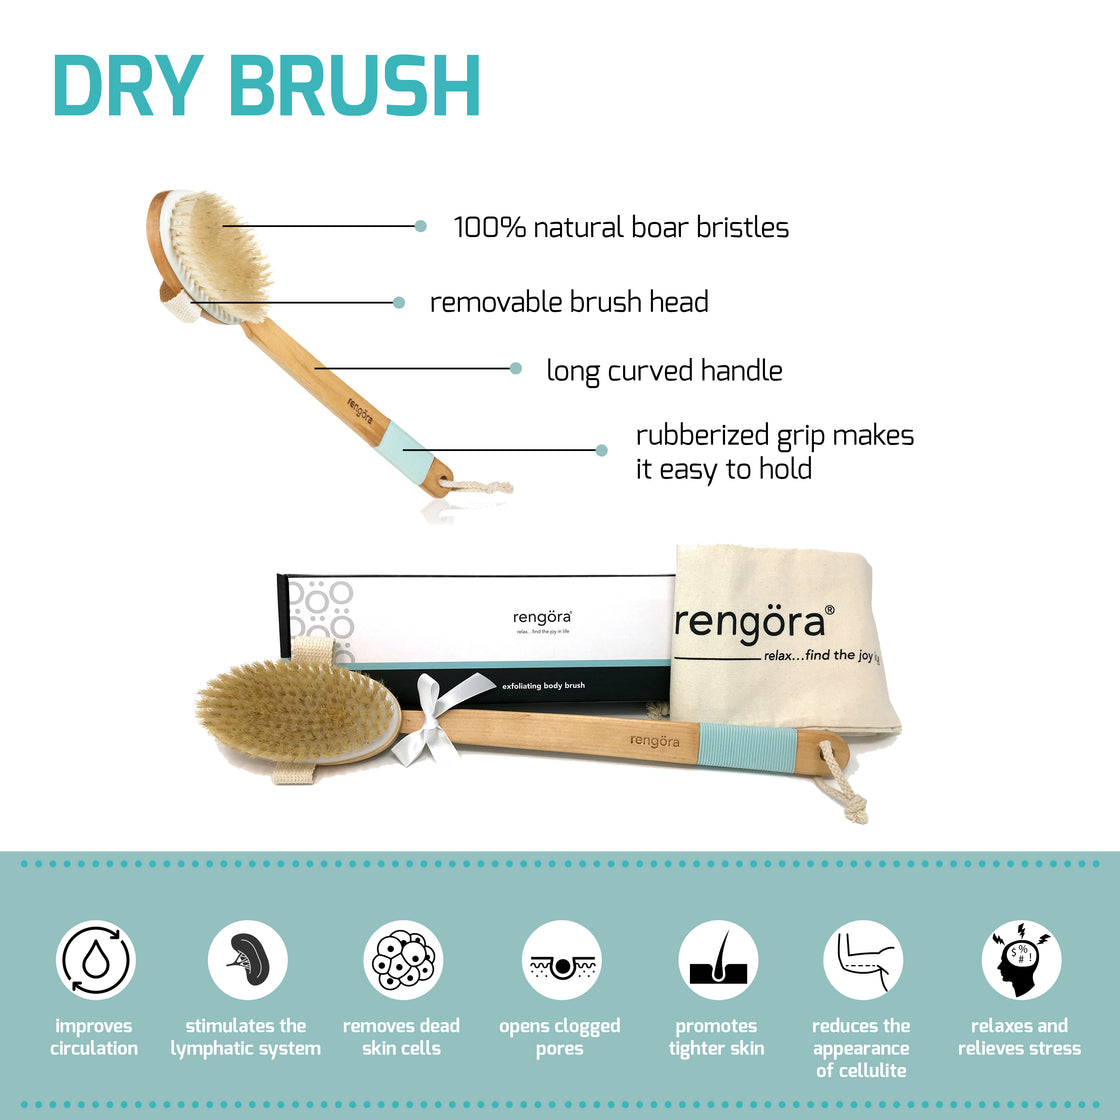 Comprehensive details about the product include a rengora brush head composed of 100% natural boar bristle, a removable brush head, a long curved handle, and rubberized grips for comfortable handling. Using this brush provides several benefits, such as enhancing circulation, stimulating the lymphatic system, exfoliating dead skin cells, unclogging pores, promoting firmer skin, reducing the appearance of cellulite, and inducing relaxation and stress relief